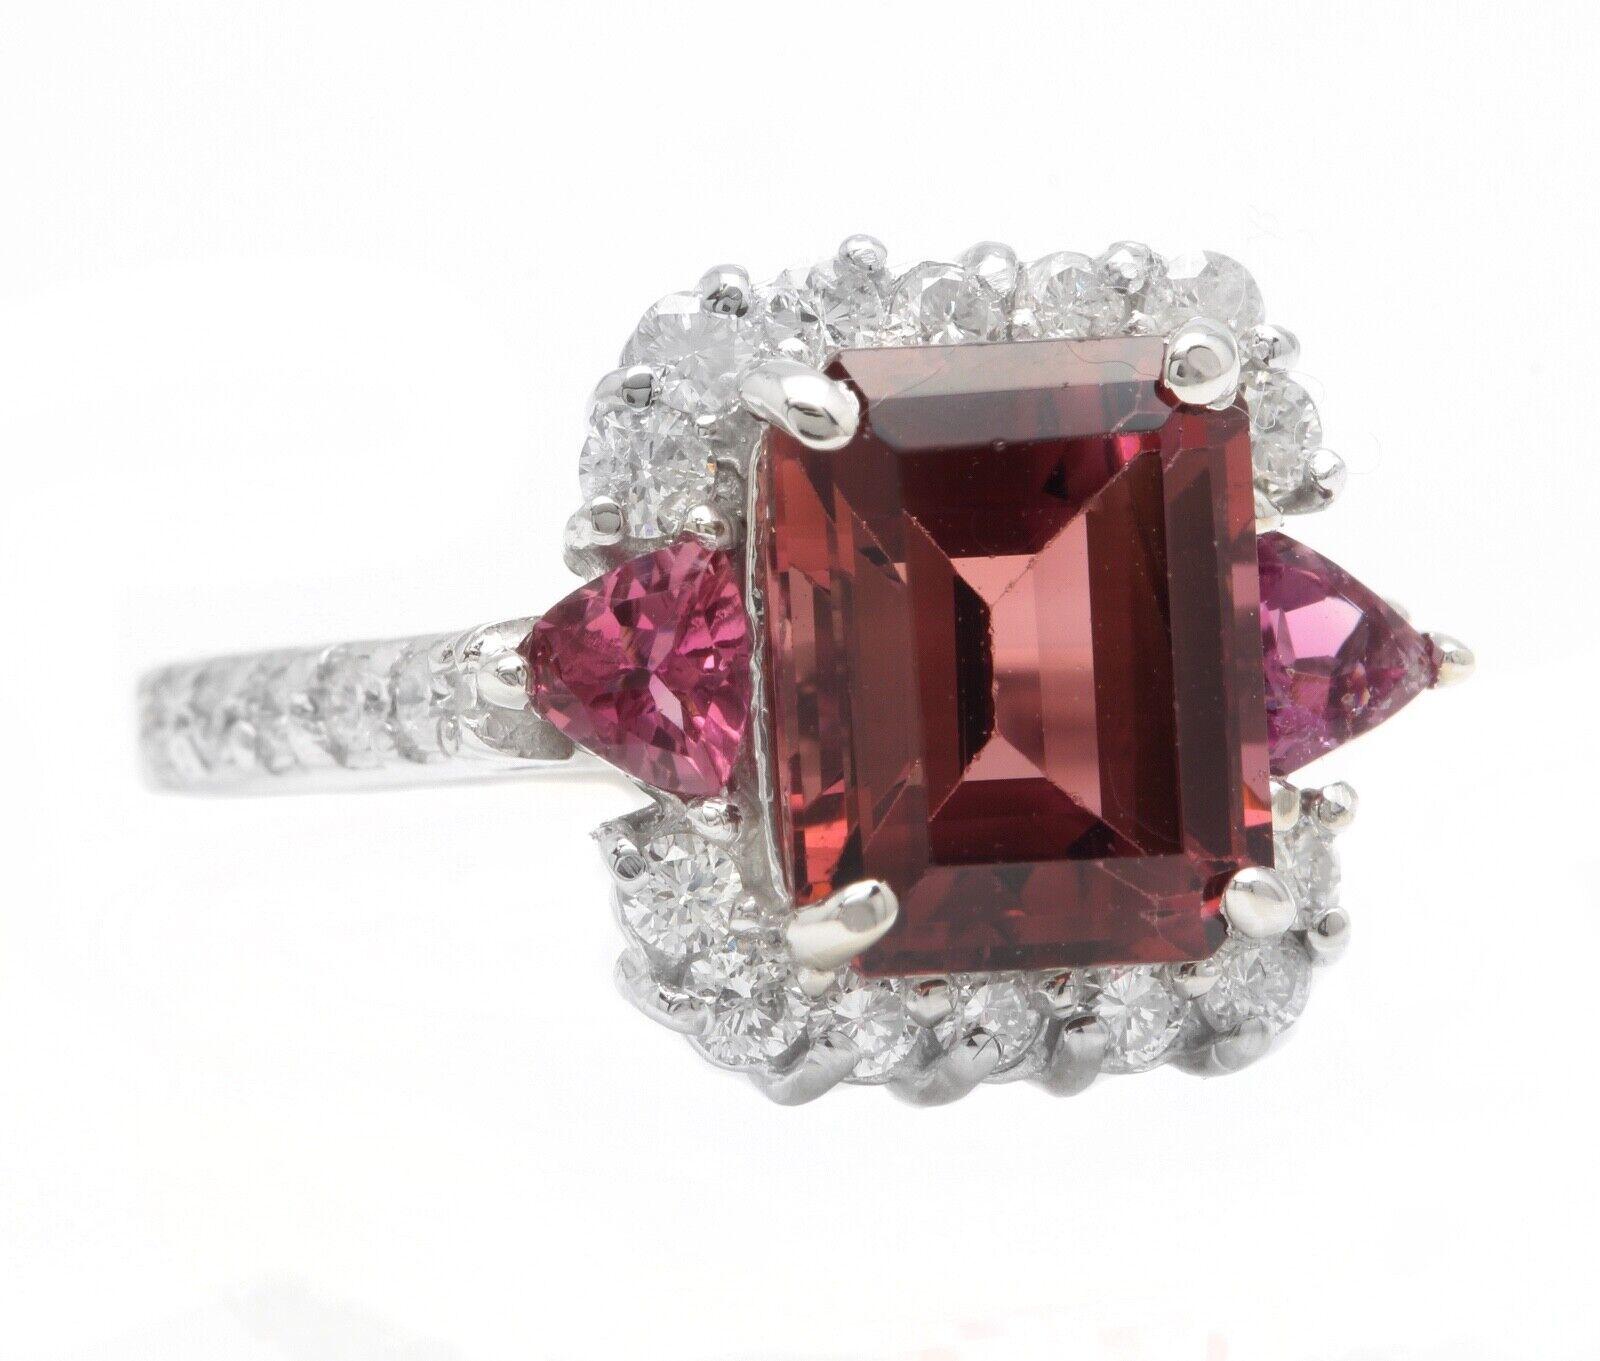 4.70 Carats Natural Very Nice Looking Tourmaline and Diamond 14K Solid White Gold Ring

Suggested Replacement Value:  $5,500.00

Total Natural Emerald & Trillion Cut Tourmaline Weight is: Approx. 4.05 Carats

Center Tourmaline Weight is: Approx.